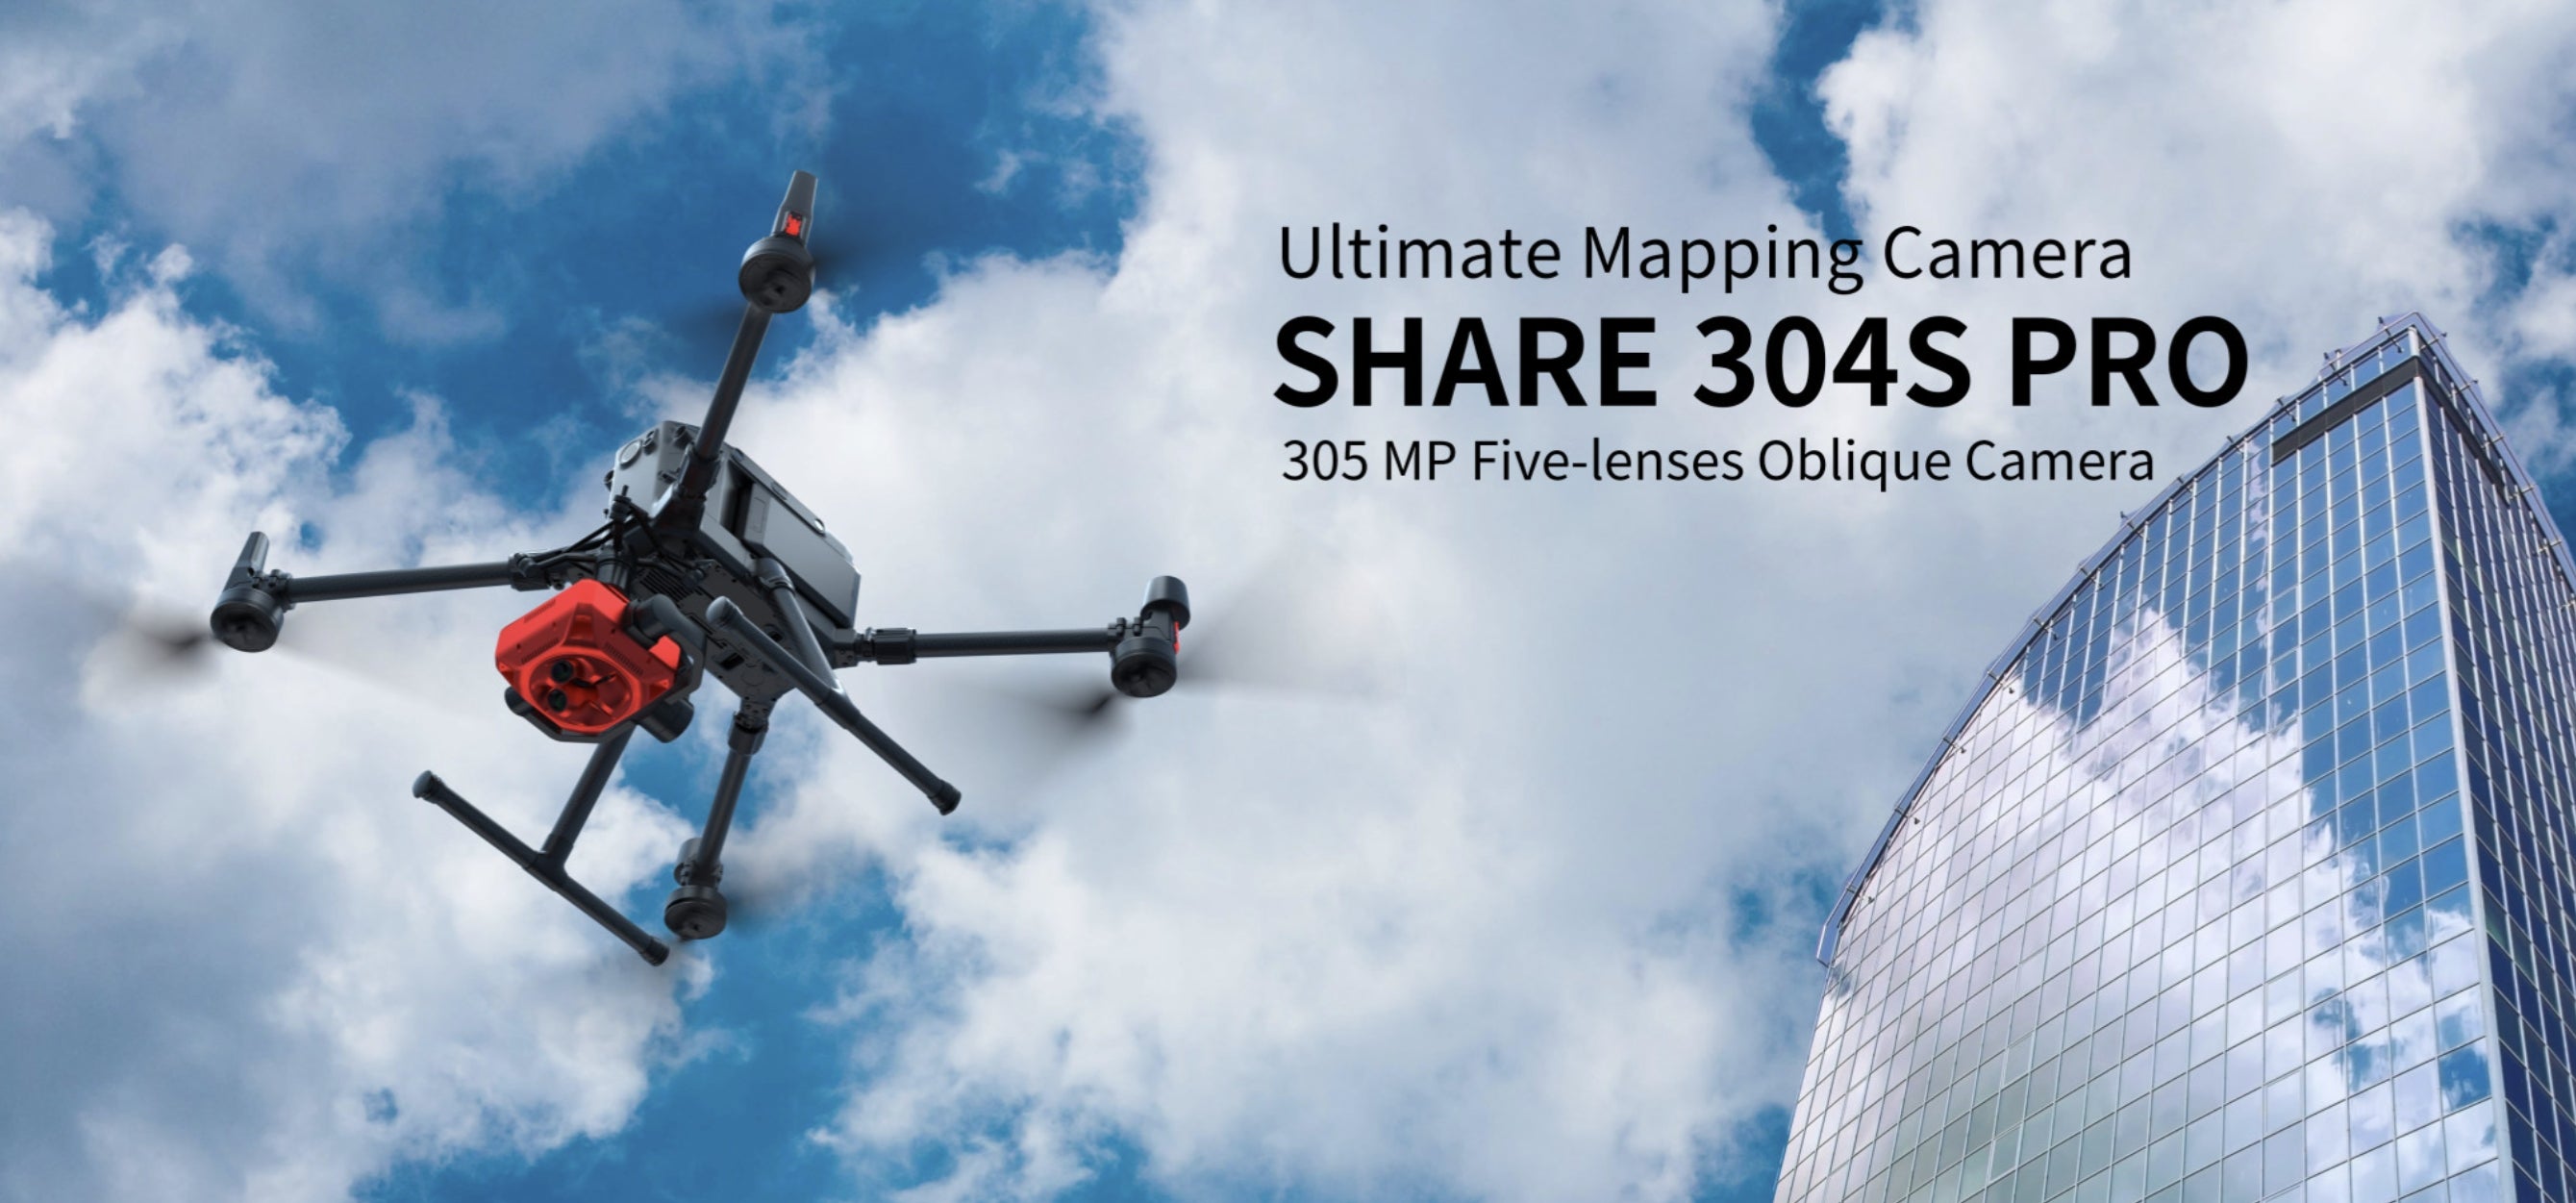 SHARE 304S Pro, High-resolution camera for 3D mapping and aerial photography with five lenses.